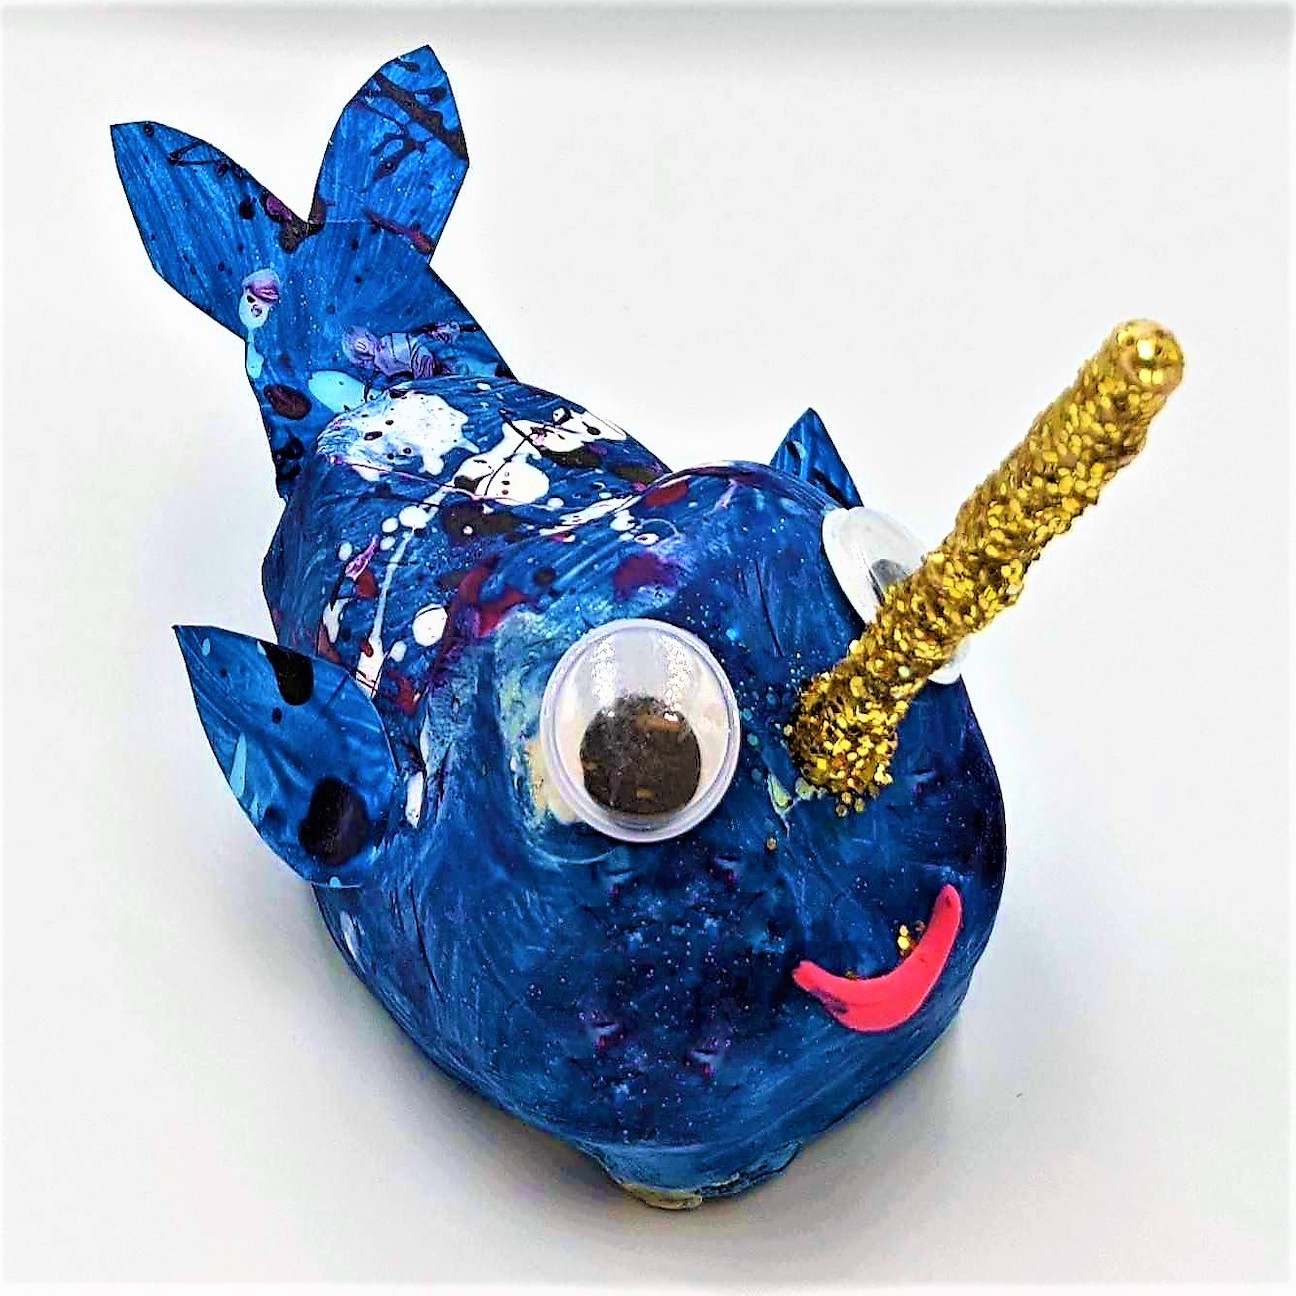 Kidcreate Studio, Nifty Narwhal Art Project